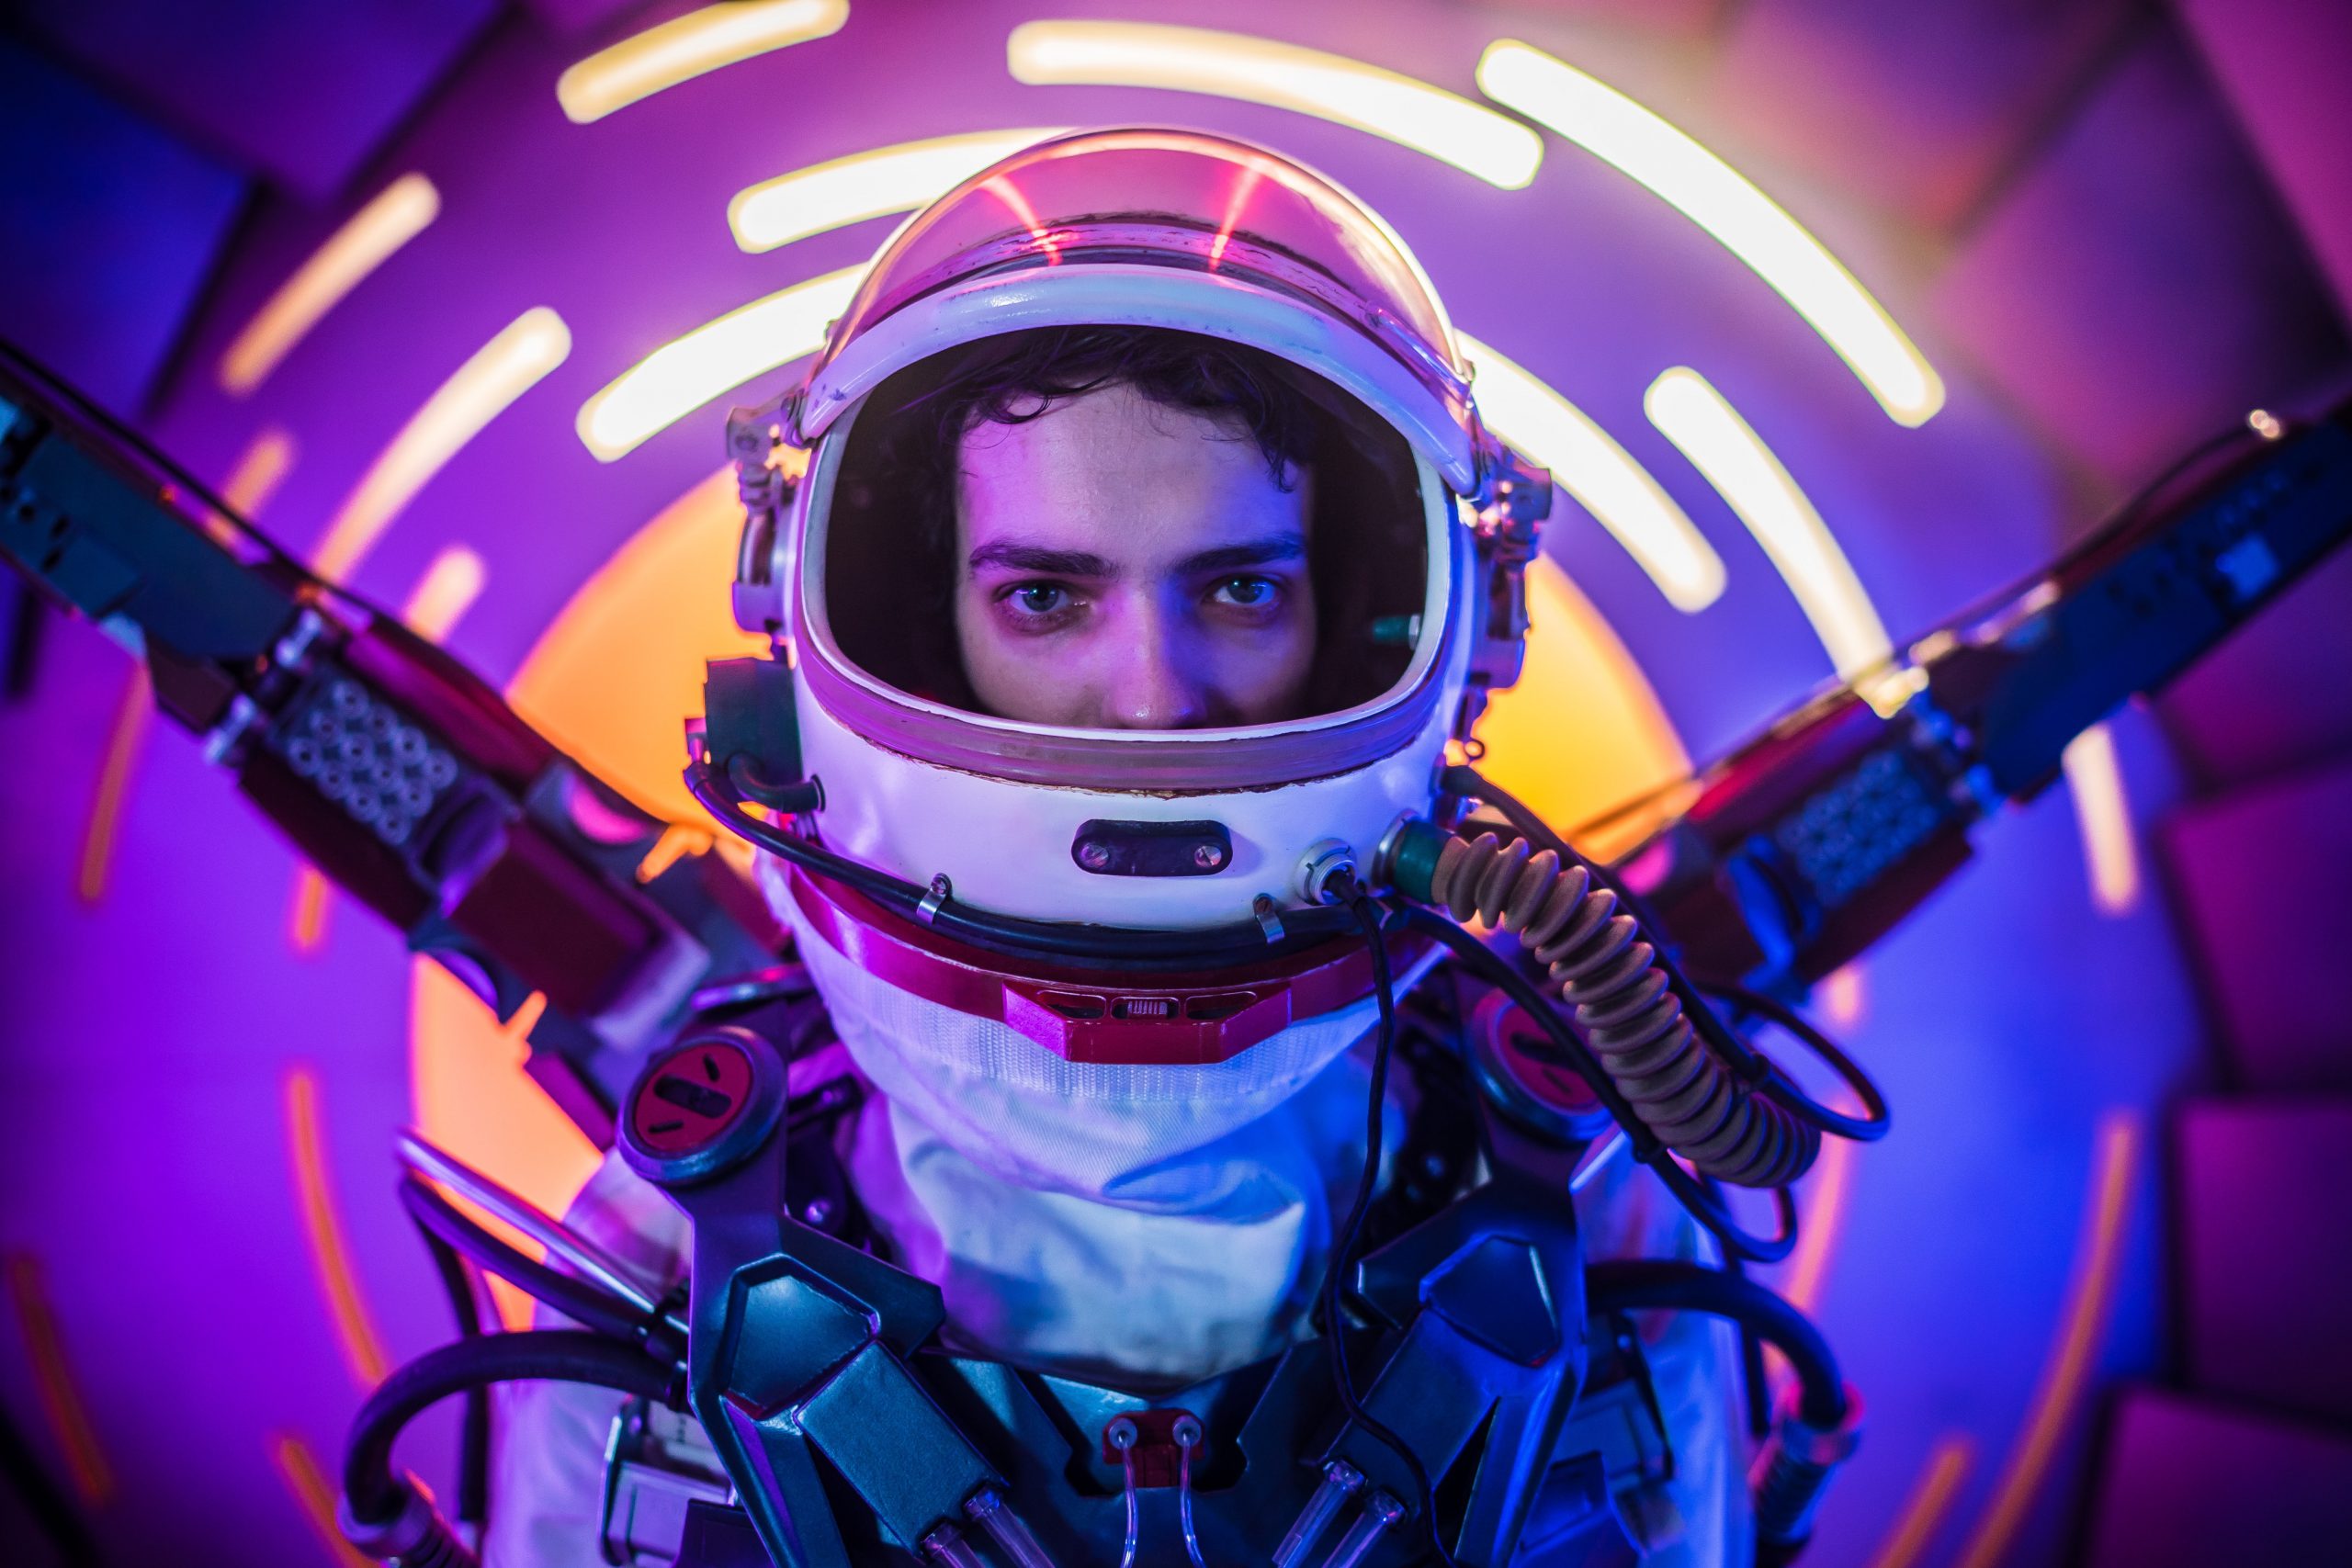 2067 a scifi actionthriller on Netflix in Australia Feb 18 Access